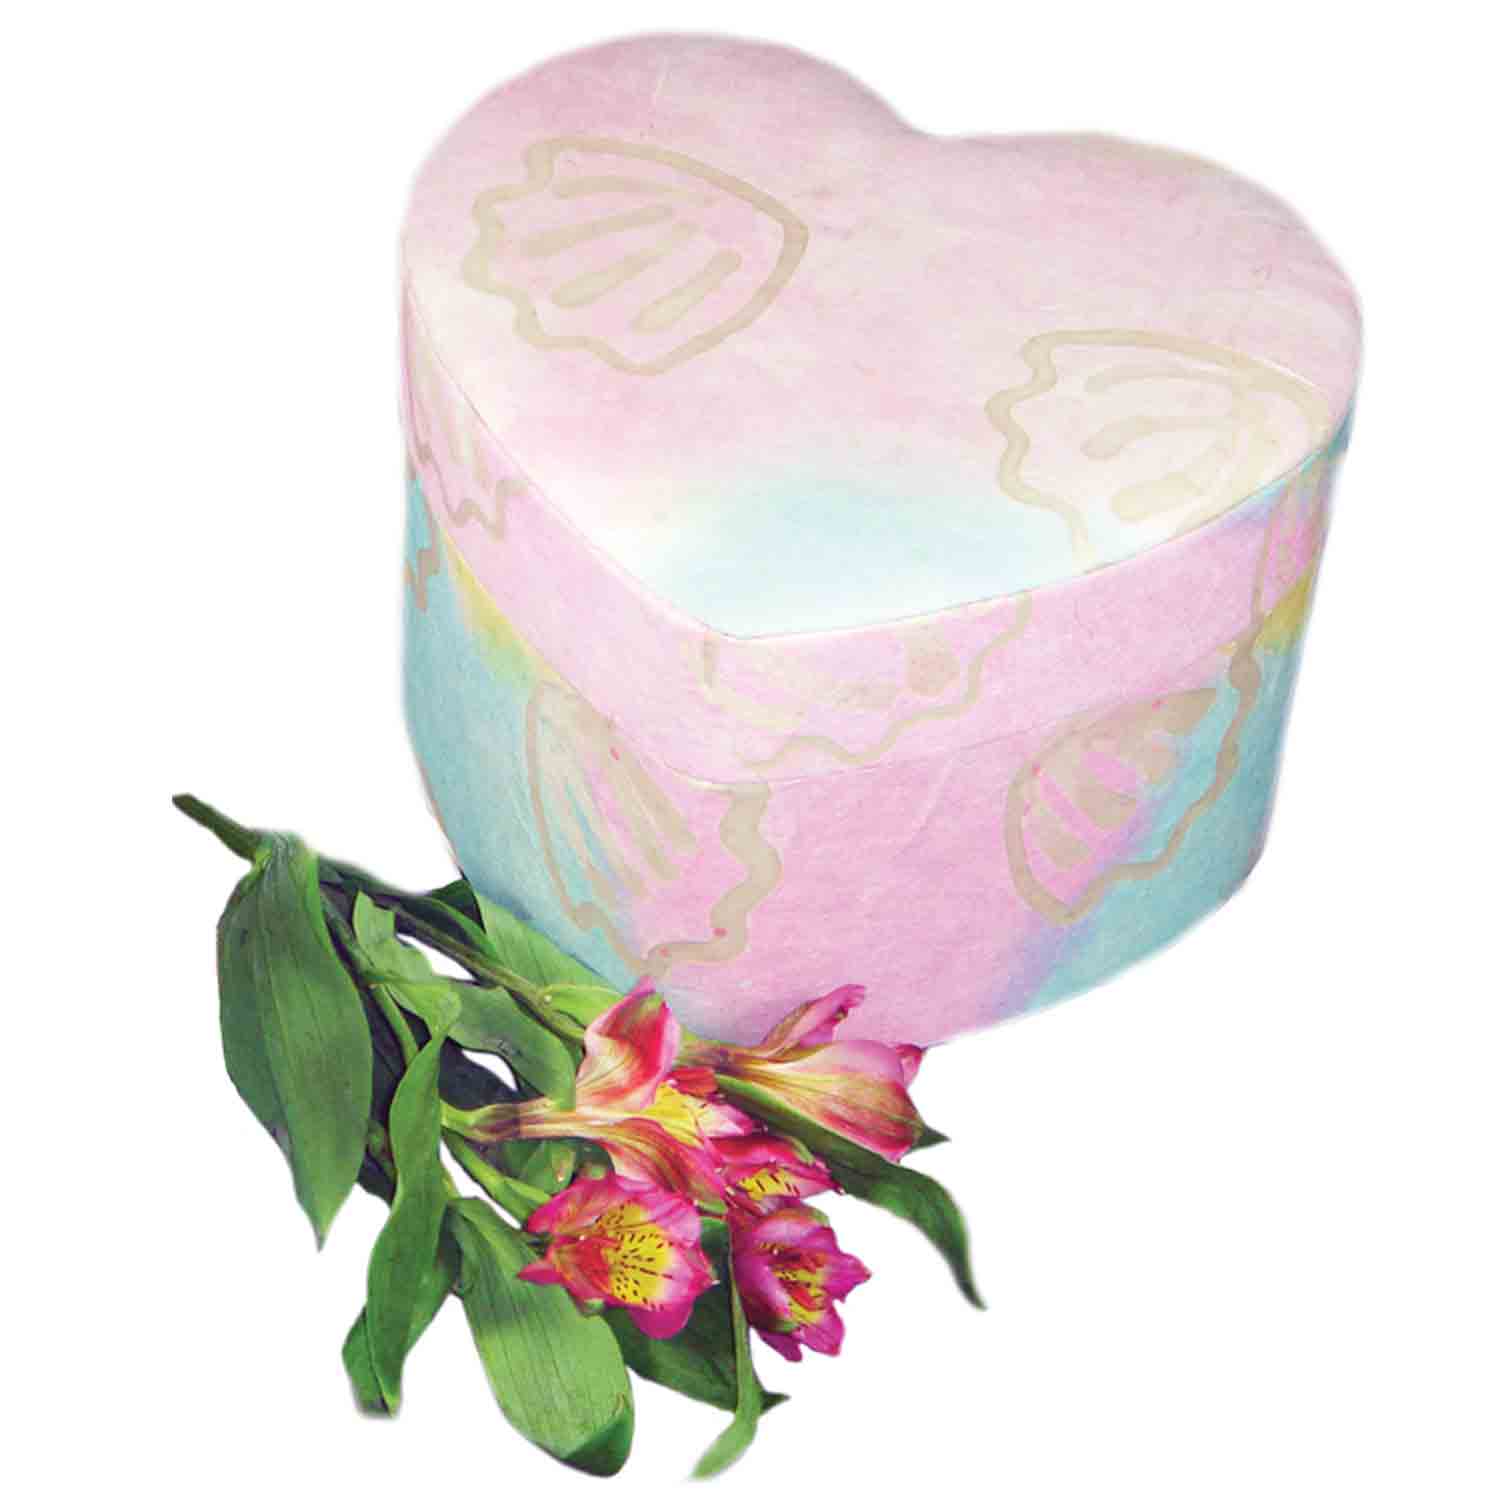 Heart Shaped Biodegradable Urn for Ashes in Pastel Medium with Flowers